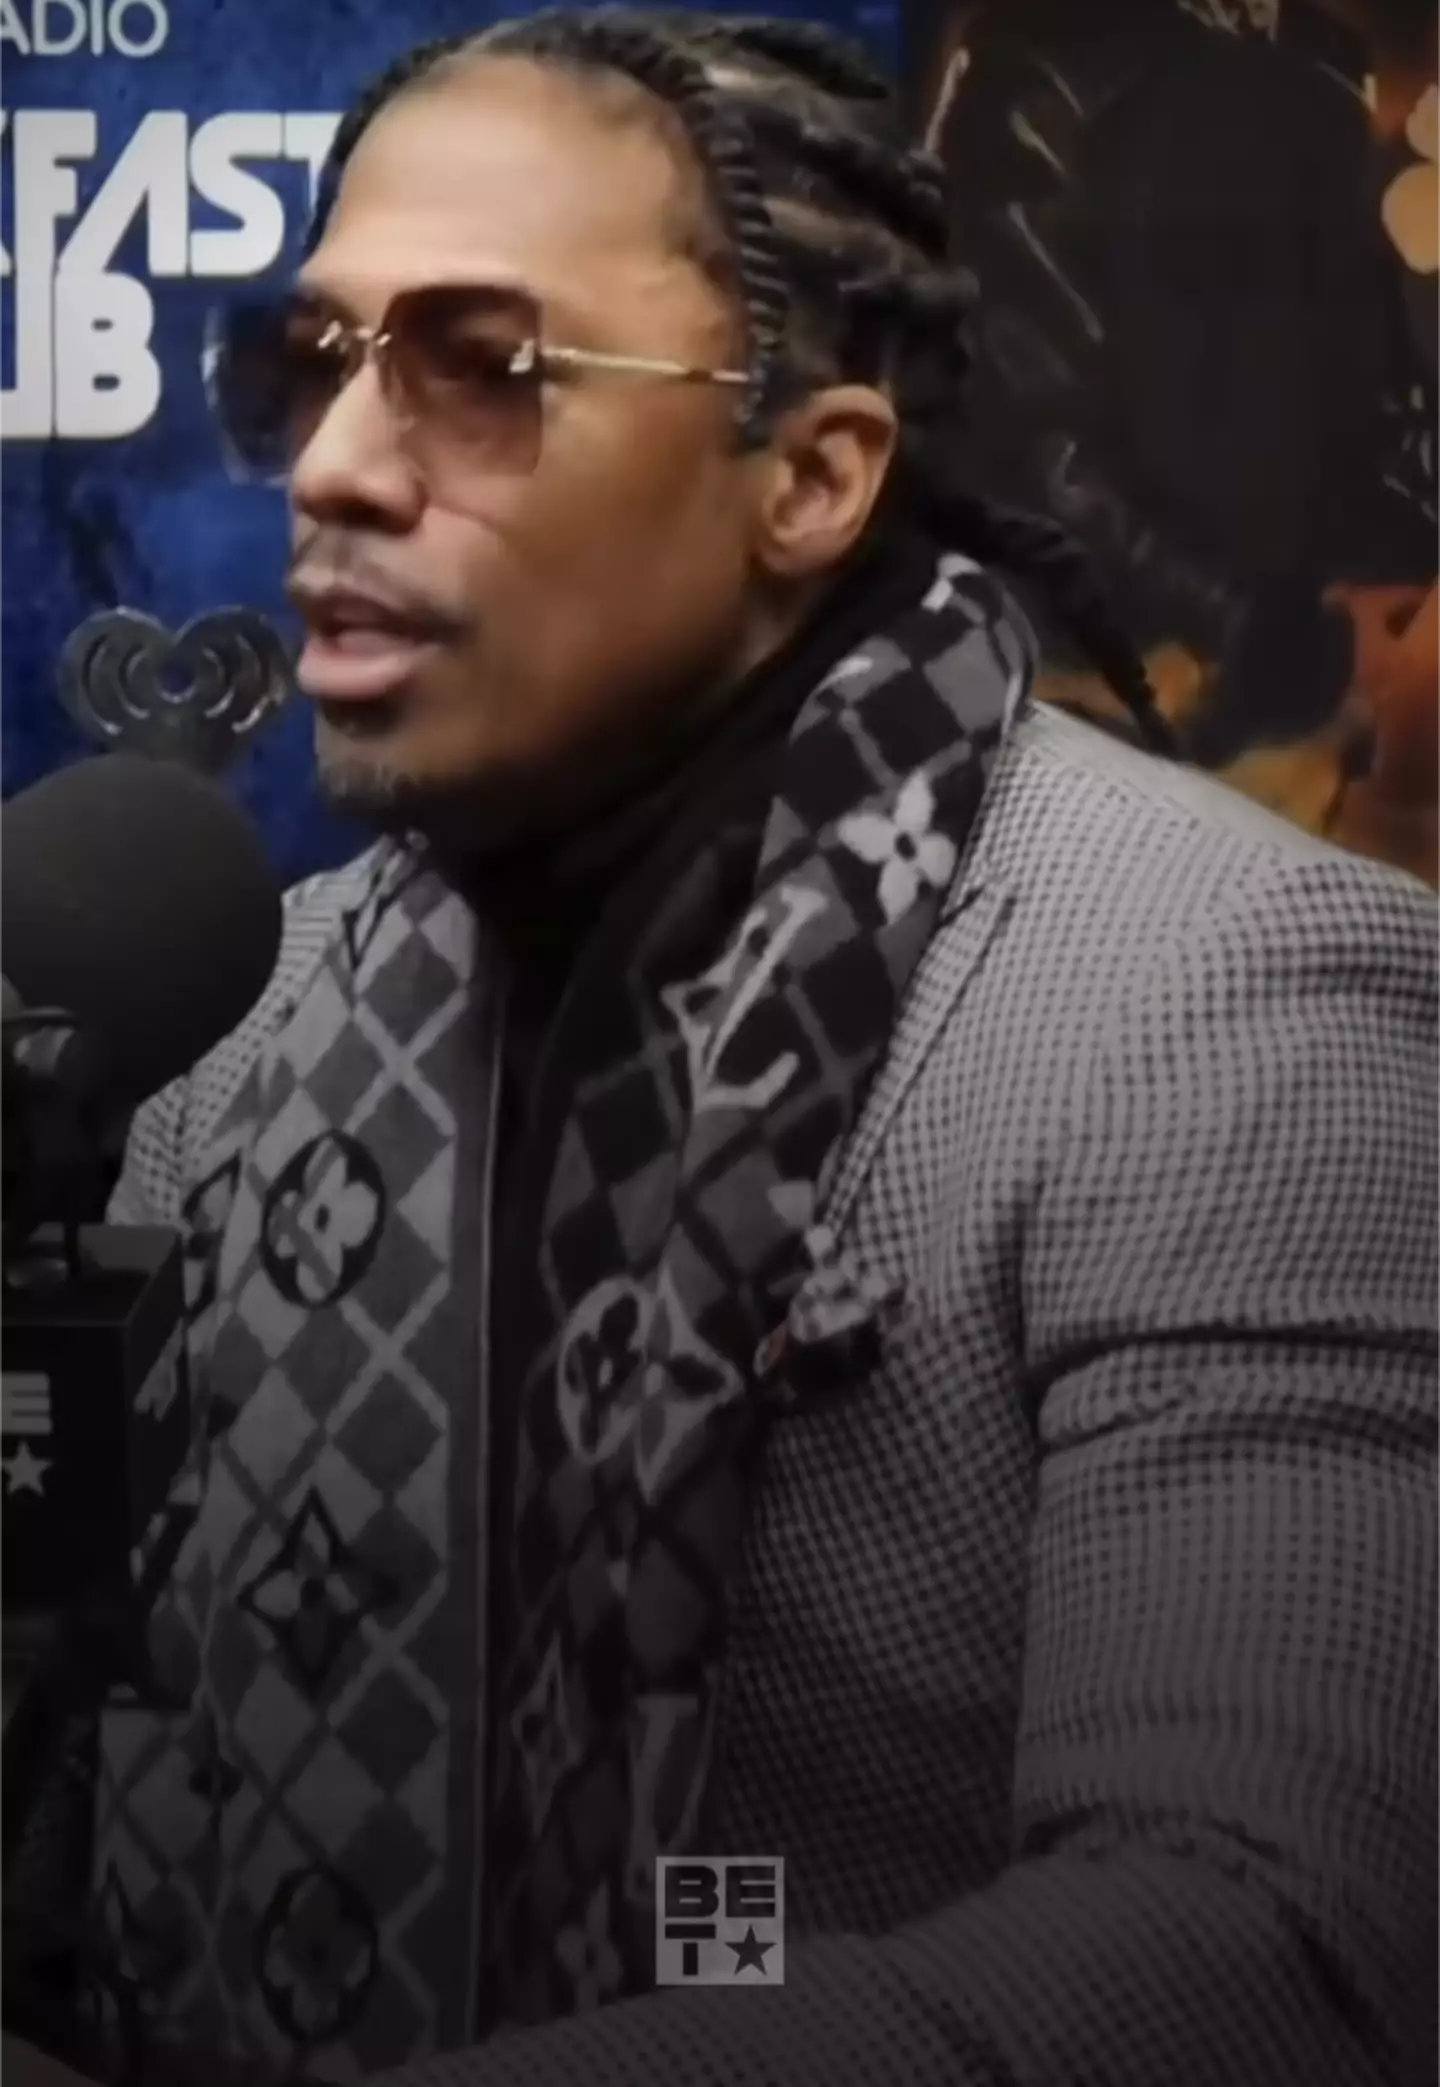 Nick Cannon stopped by The Breakfast Club and disclosed how much Disneyland costs him.